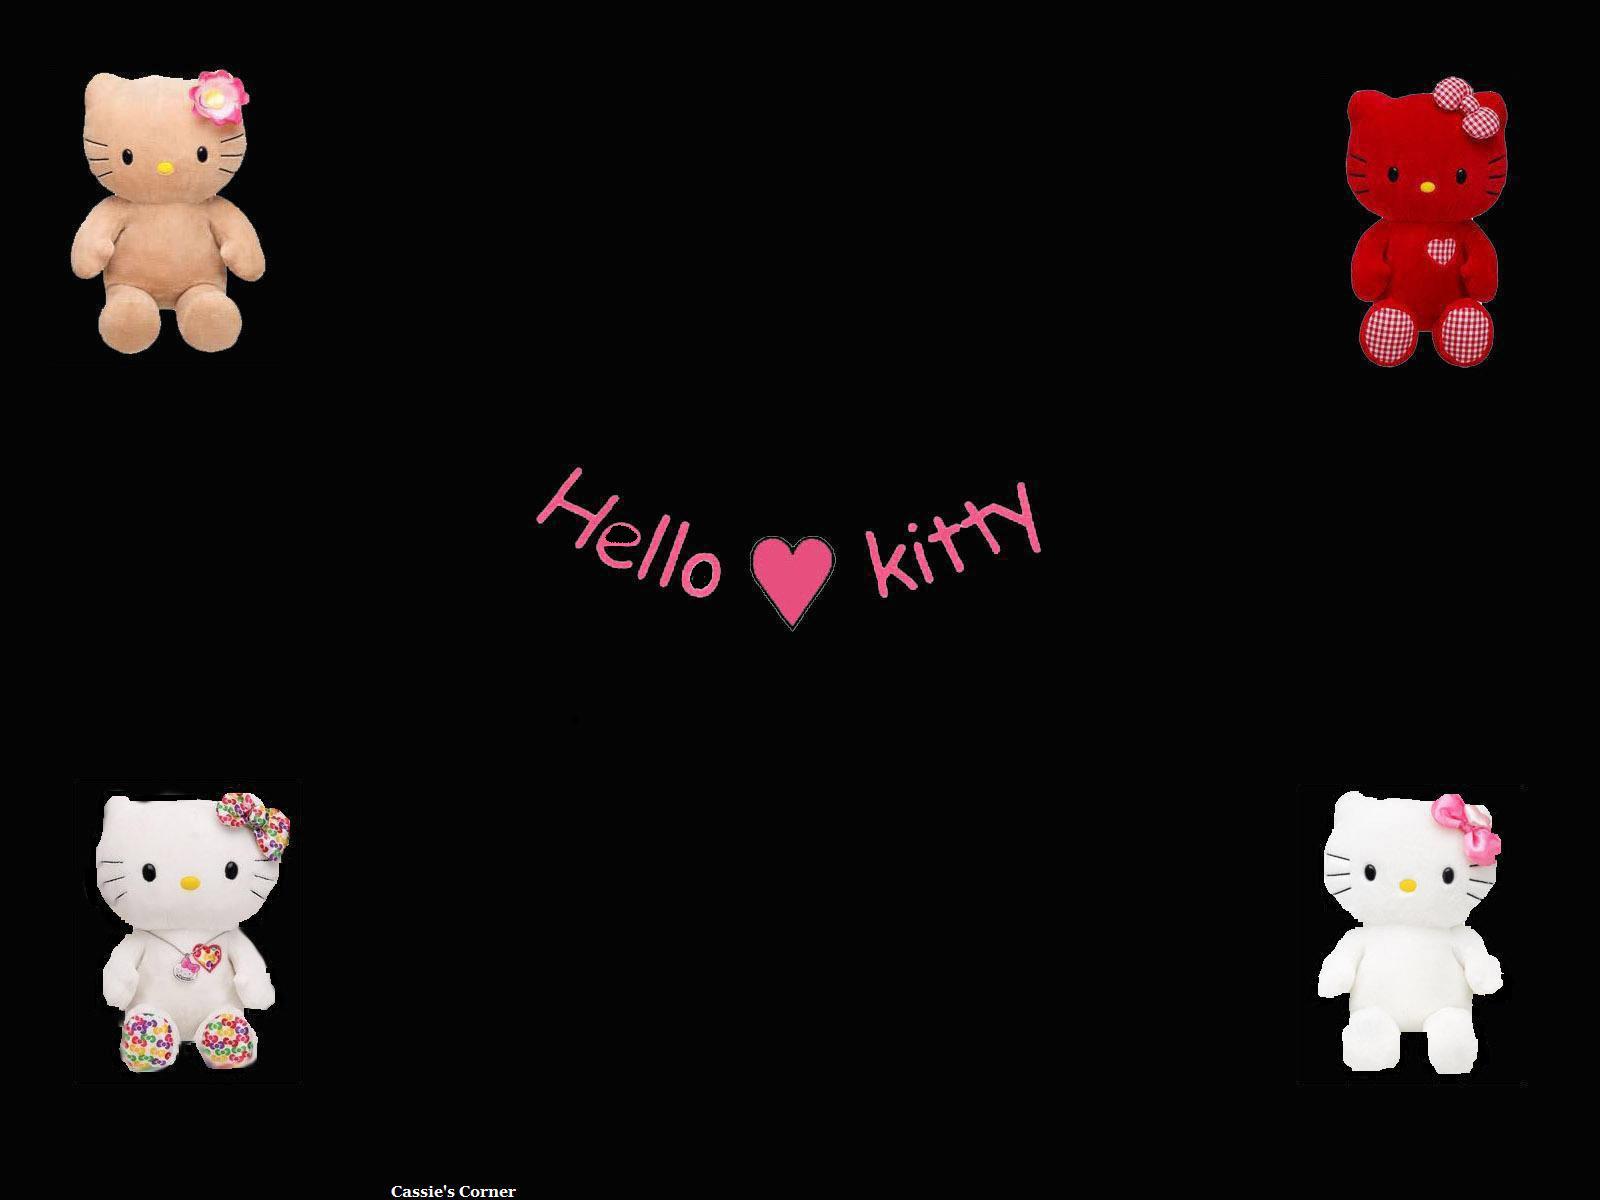 Hello Kitty Wallpaper Pink And Black Love - Black Love Wallpaper Background  Hello Kitty - 1600x1200 Wallpaper 